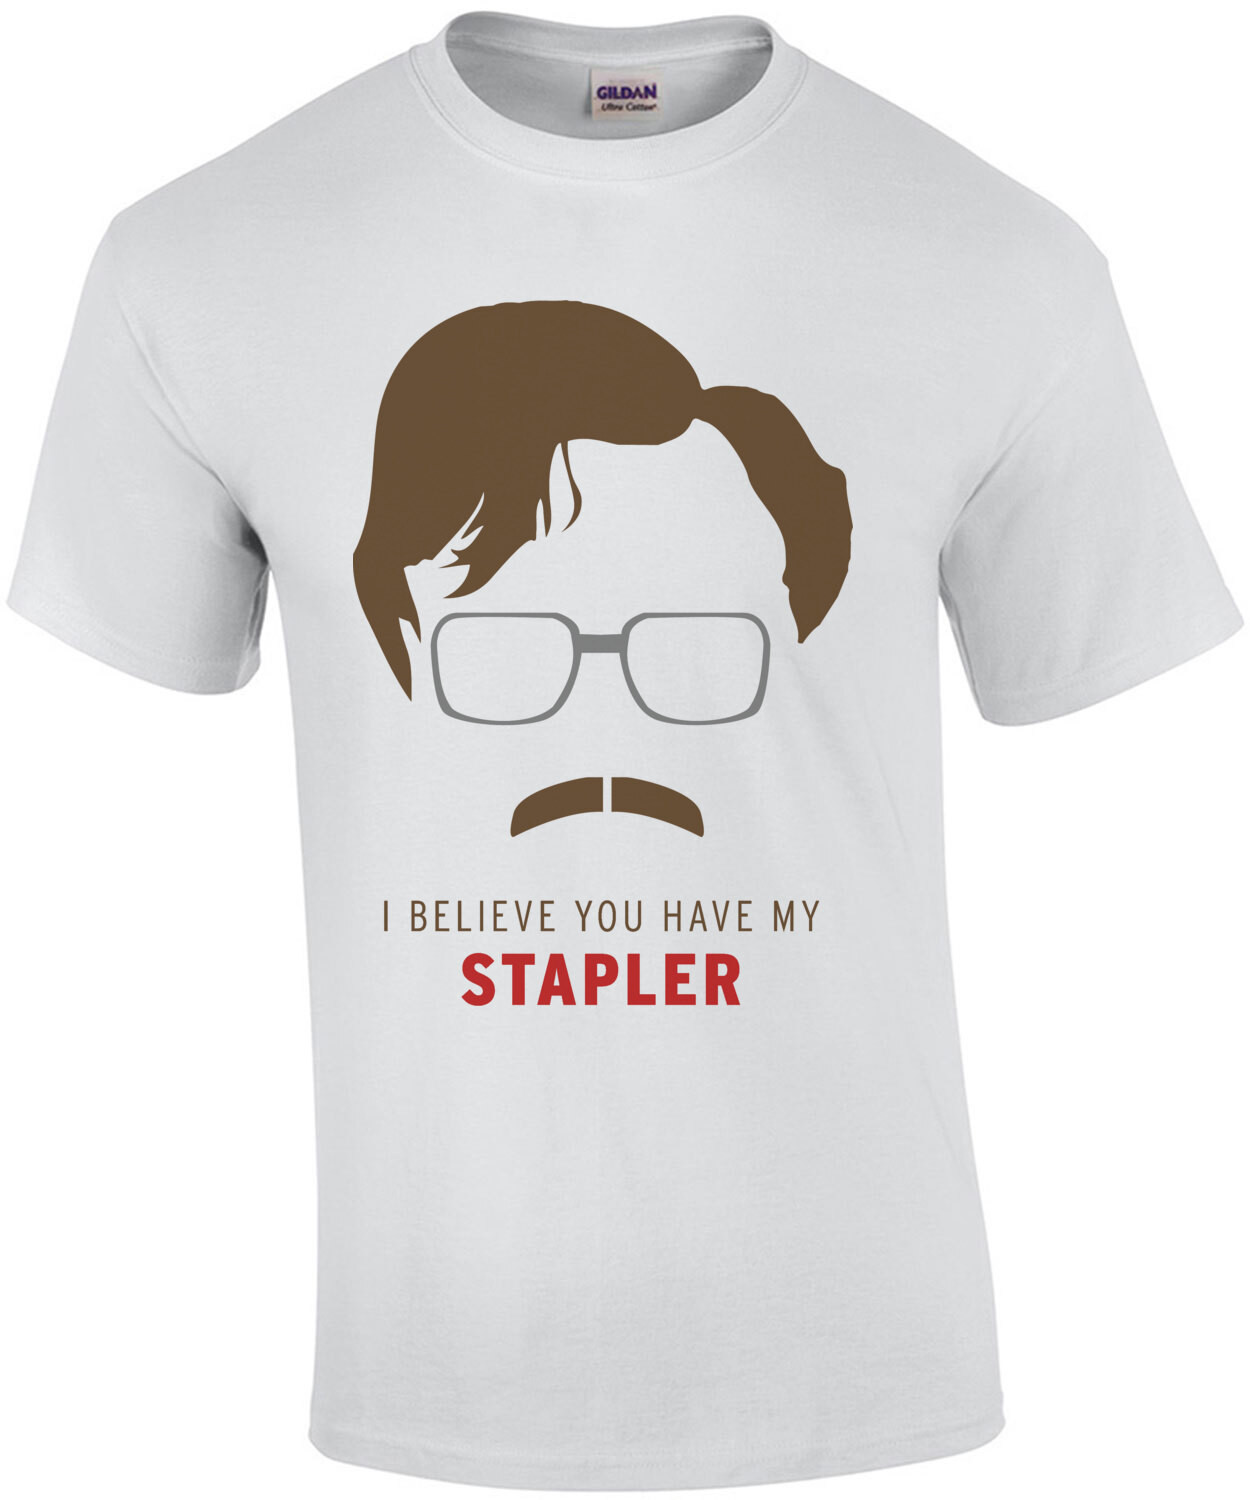 I believe you have my stapler - Milton - Office Space - 90's T-Shirt